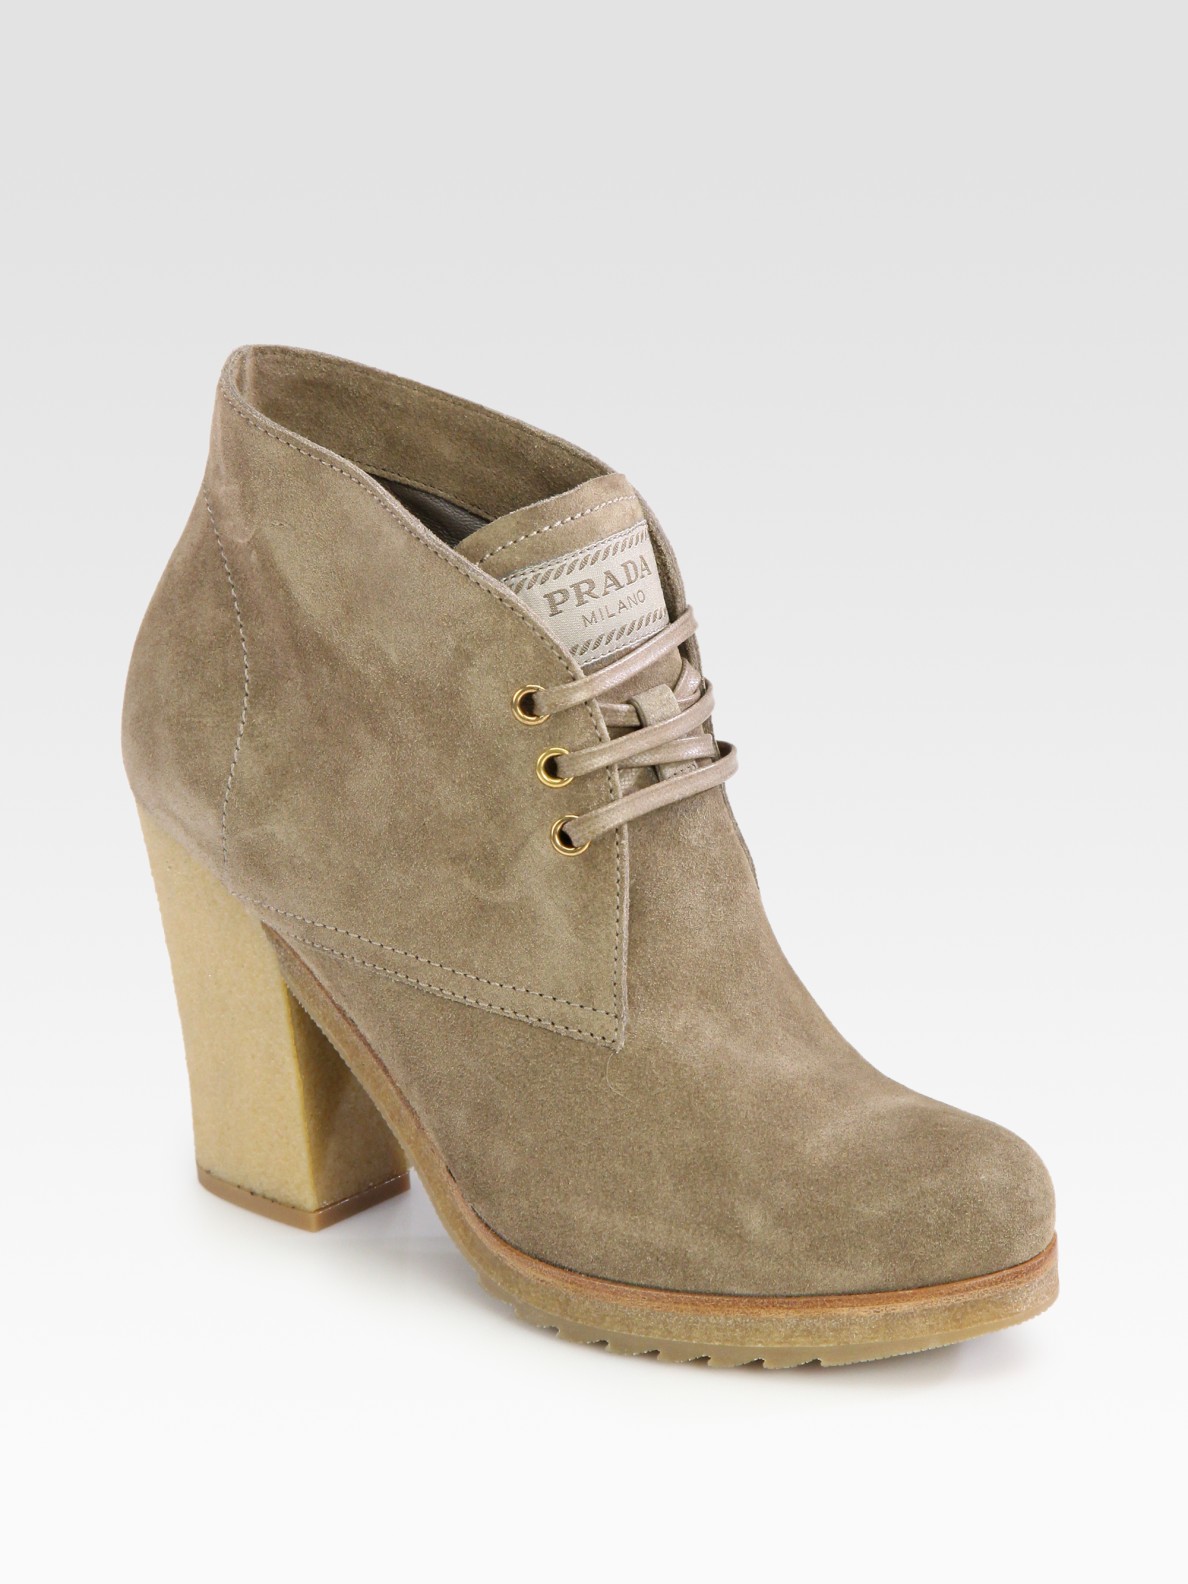 Prada Suede Lace Up Platform Ankle Boots in Beige | Lyst